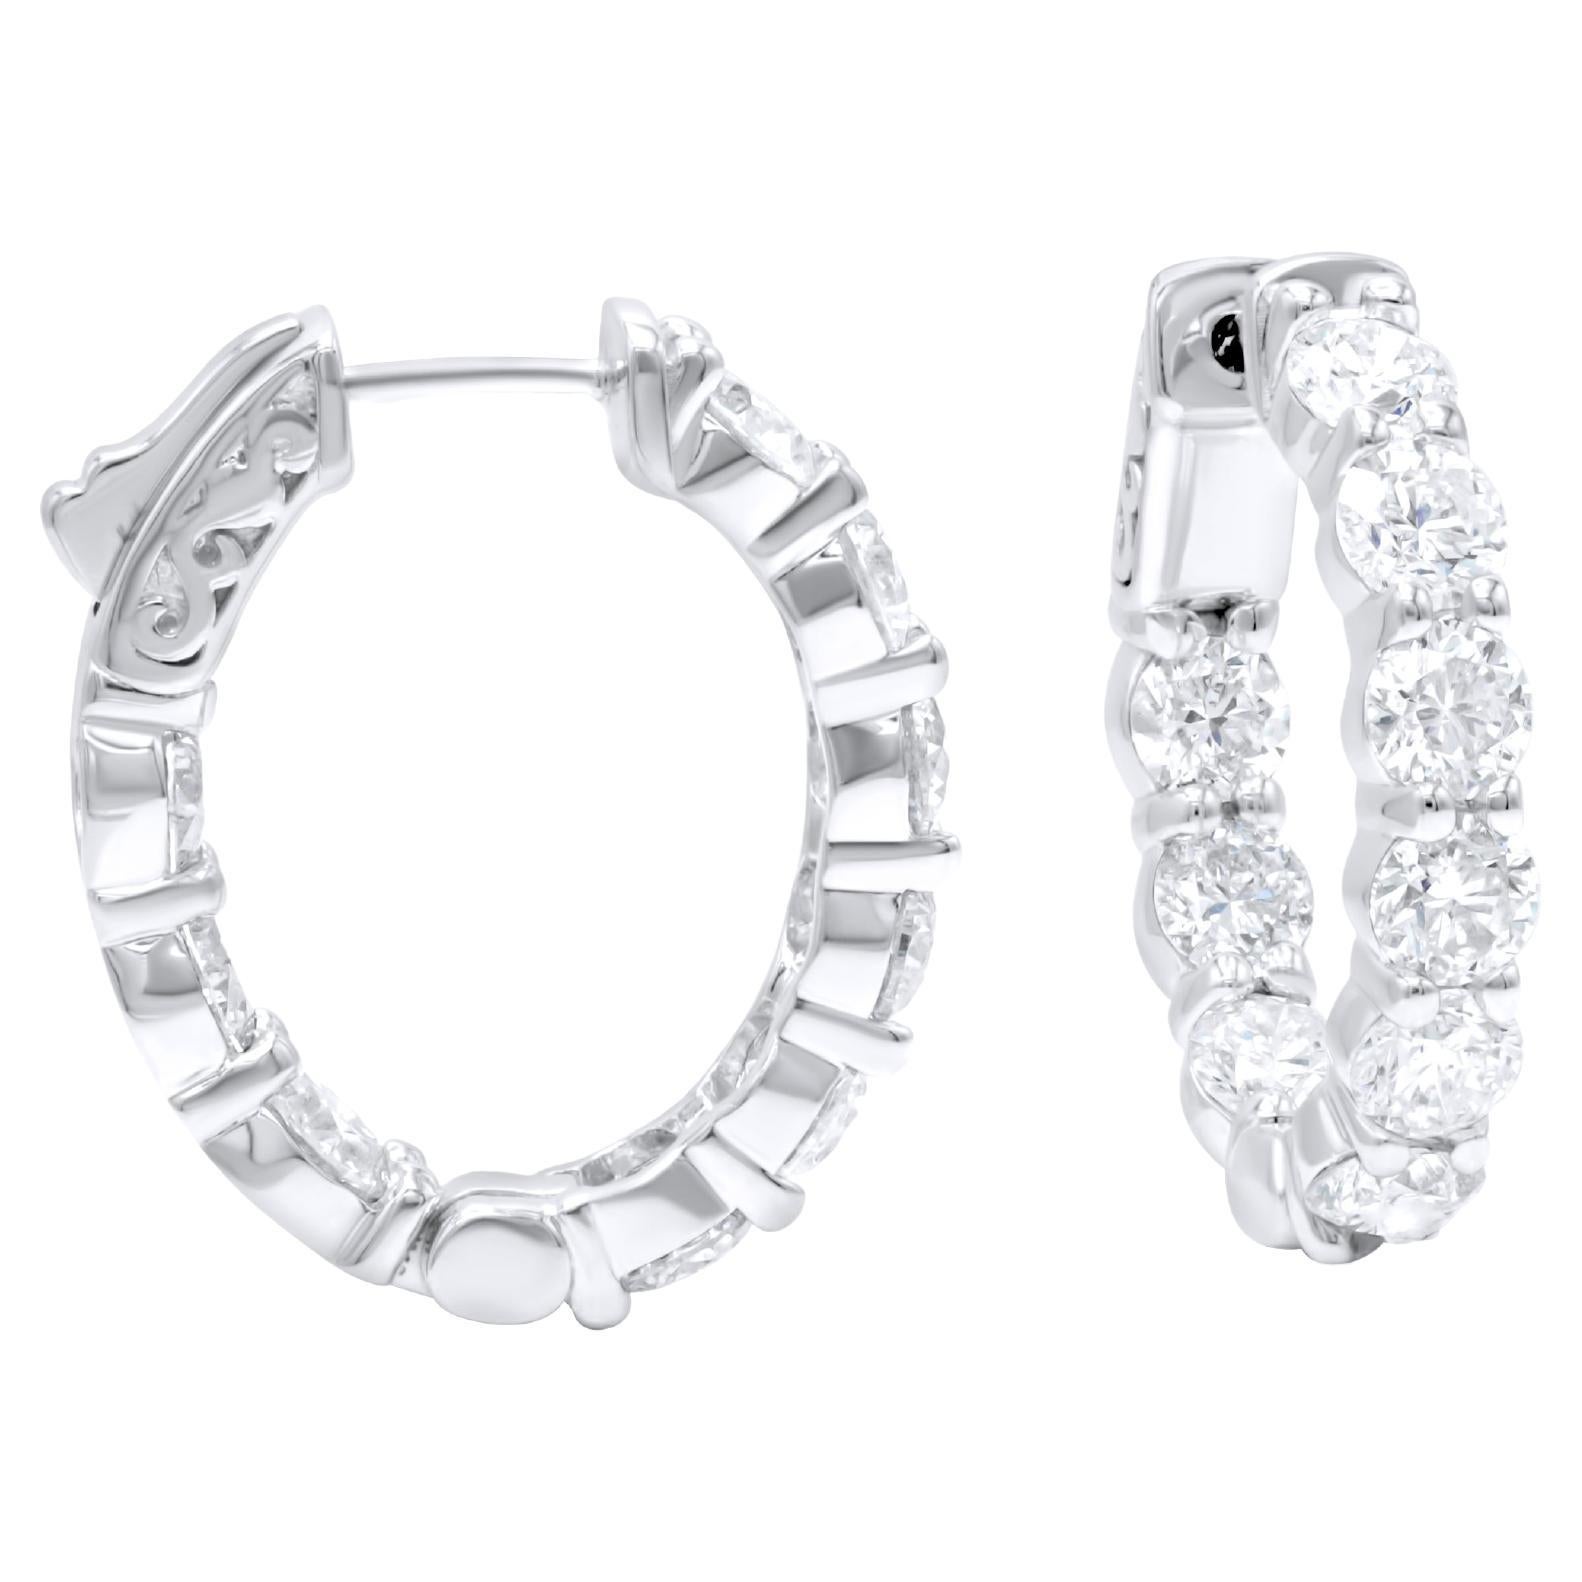 Diana M. 18 kt white gold, 0.75" inside-out hoop earrings adorned with 4.55 cts  For Sale